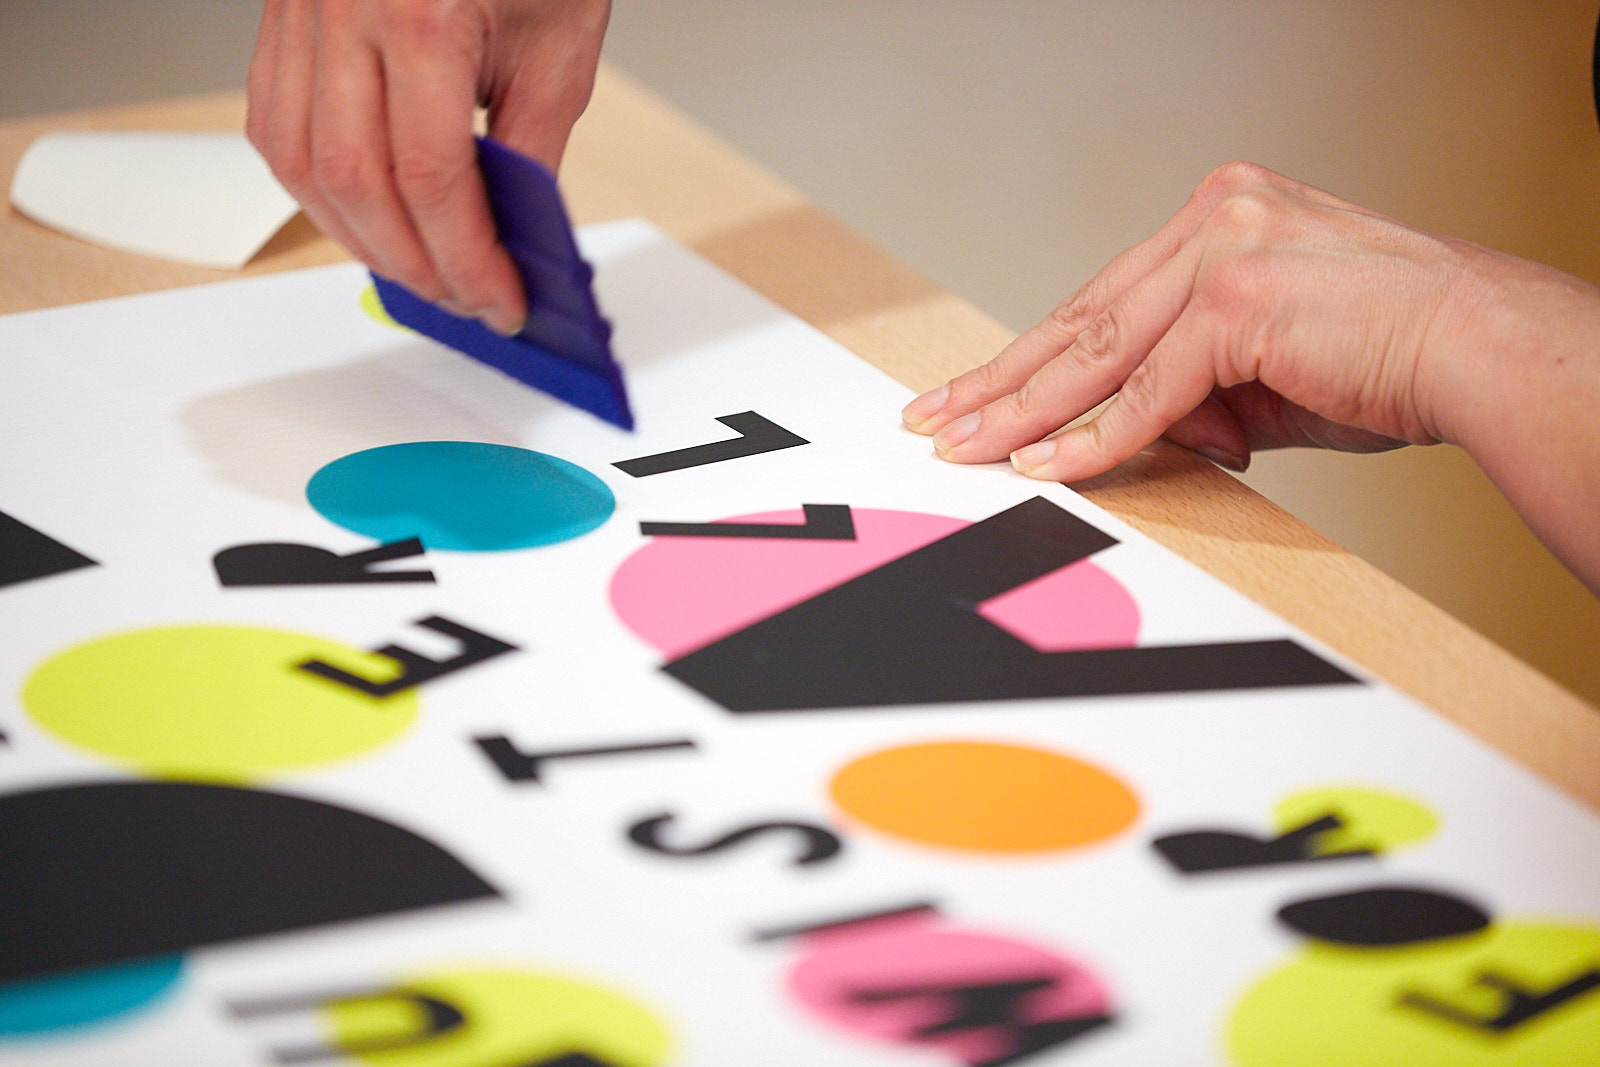 A person gluing cut out black letters and blue, orange and yellow circles to create a poster.